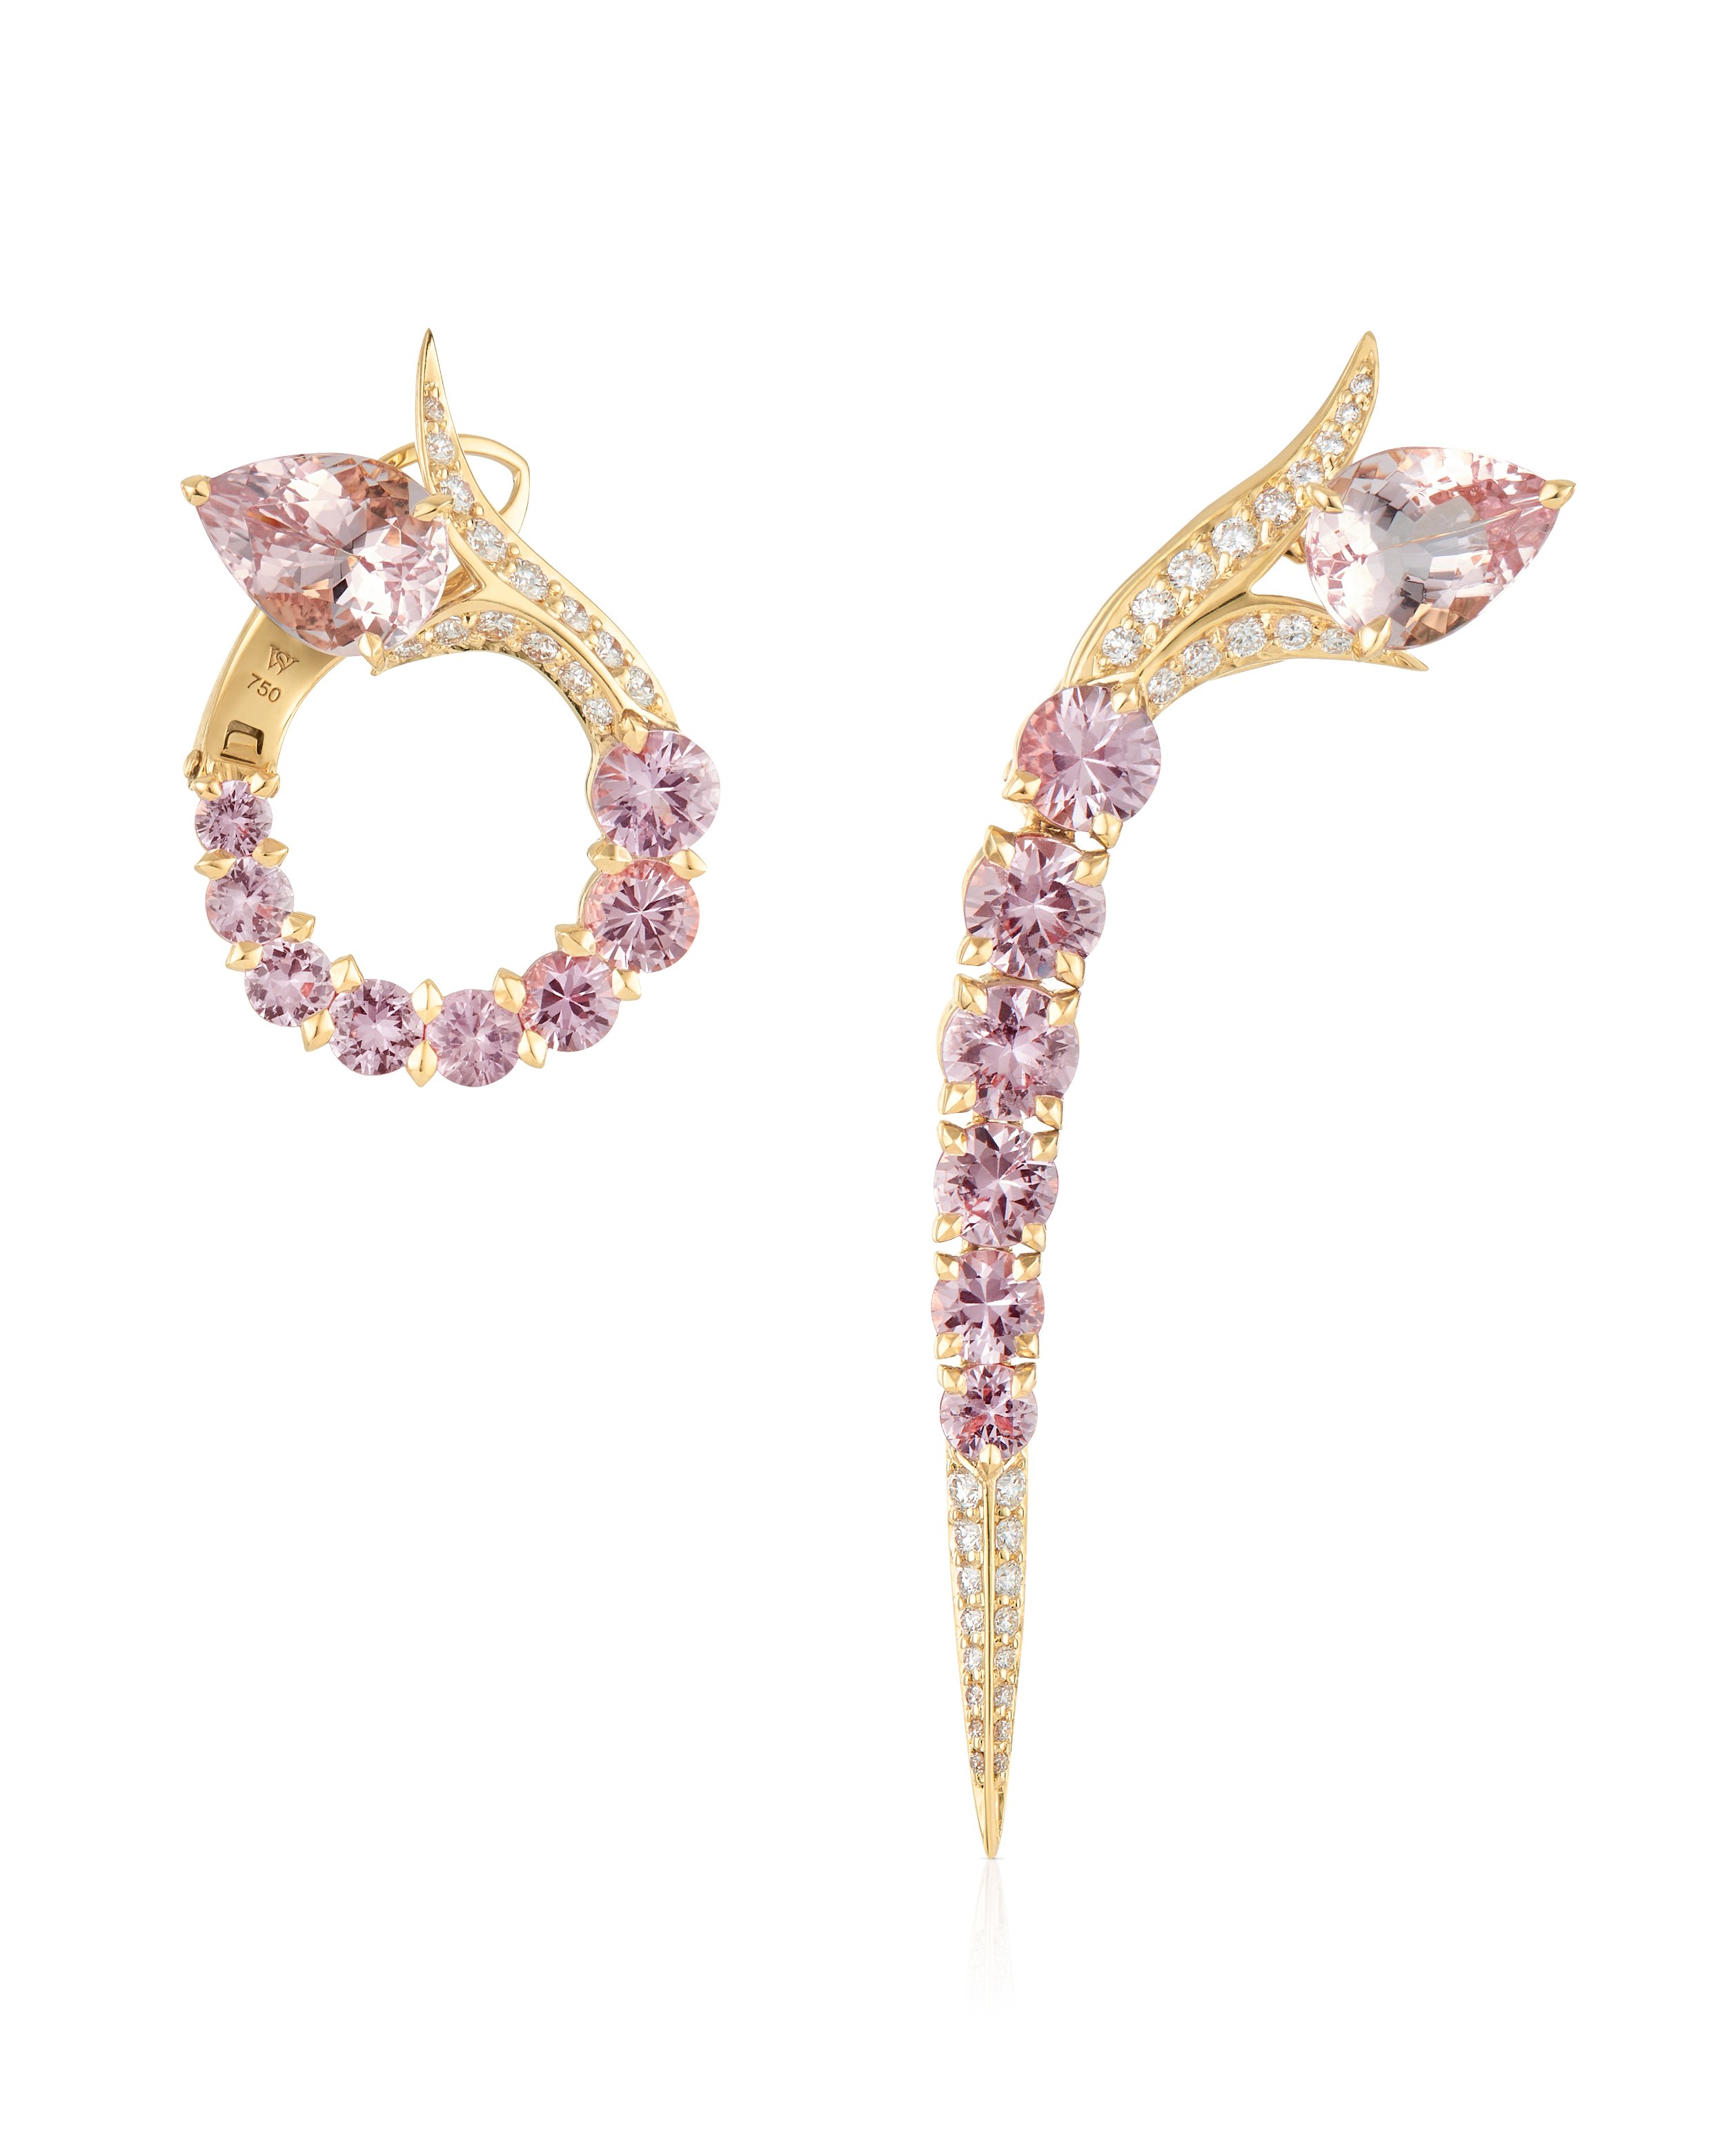 Thorn Embrace Unfurled 2-Way Hoop Earrings with Morganite, Pink Sapphire and White Diamonds in 18kt Yellow Gold